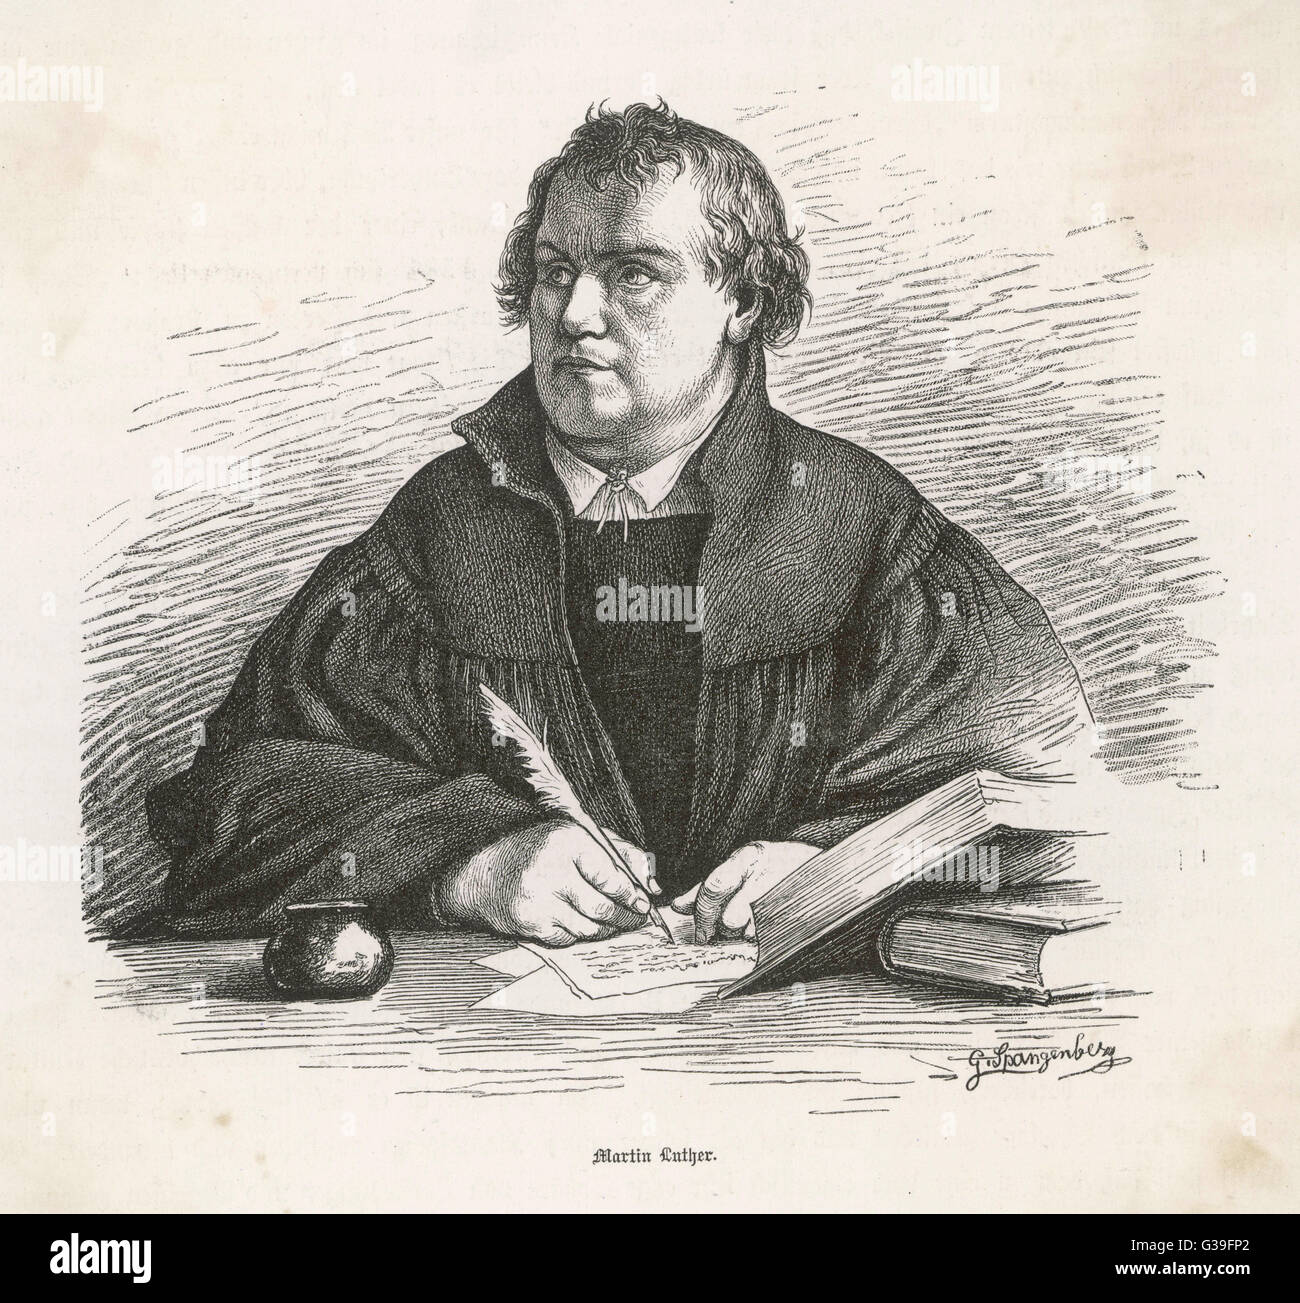 MARTIN LUTHER  German church reformer, depicted writing       Date: 1483 - 1546 Stock Photo